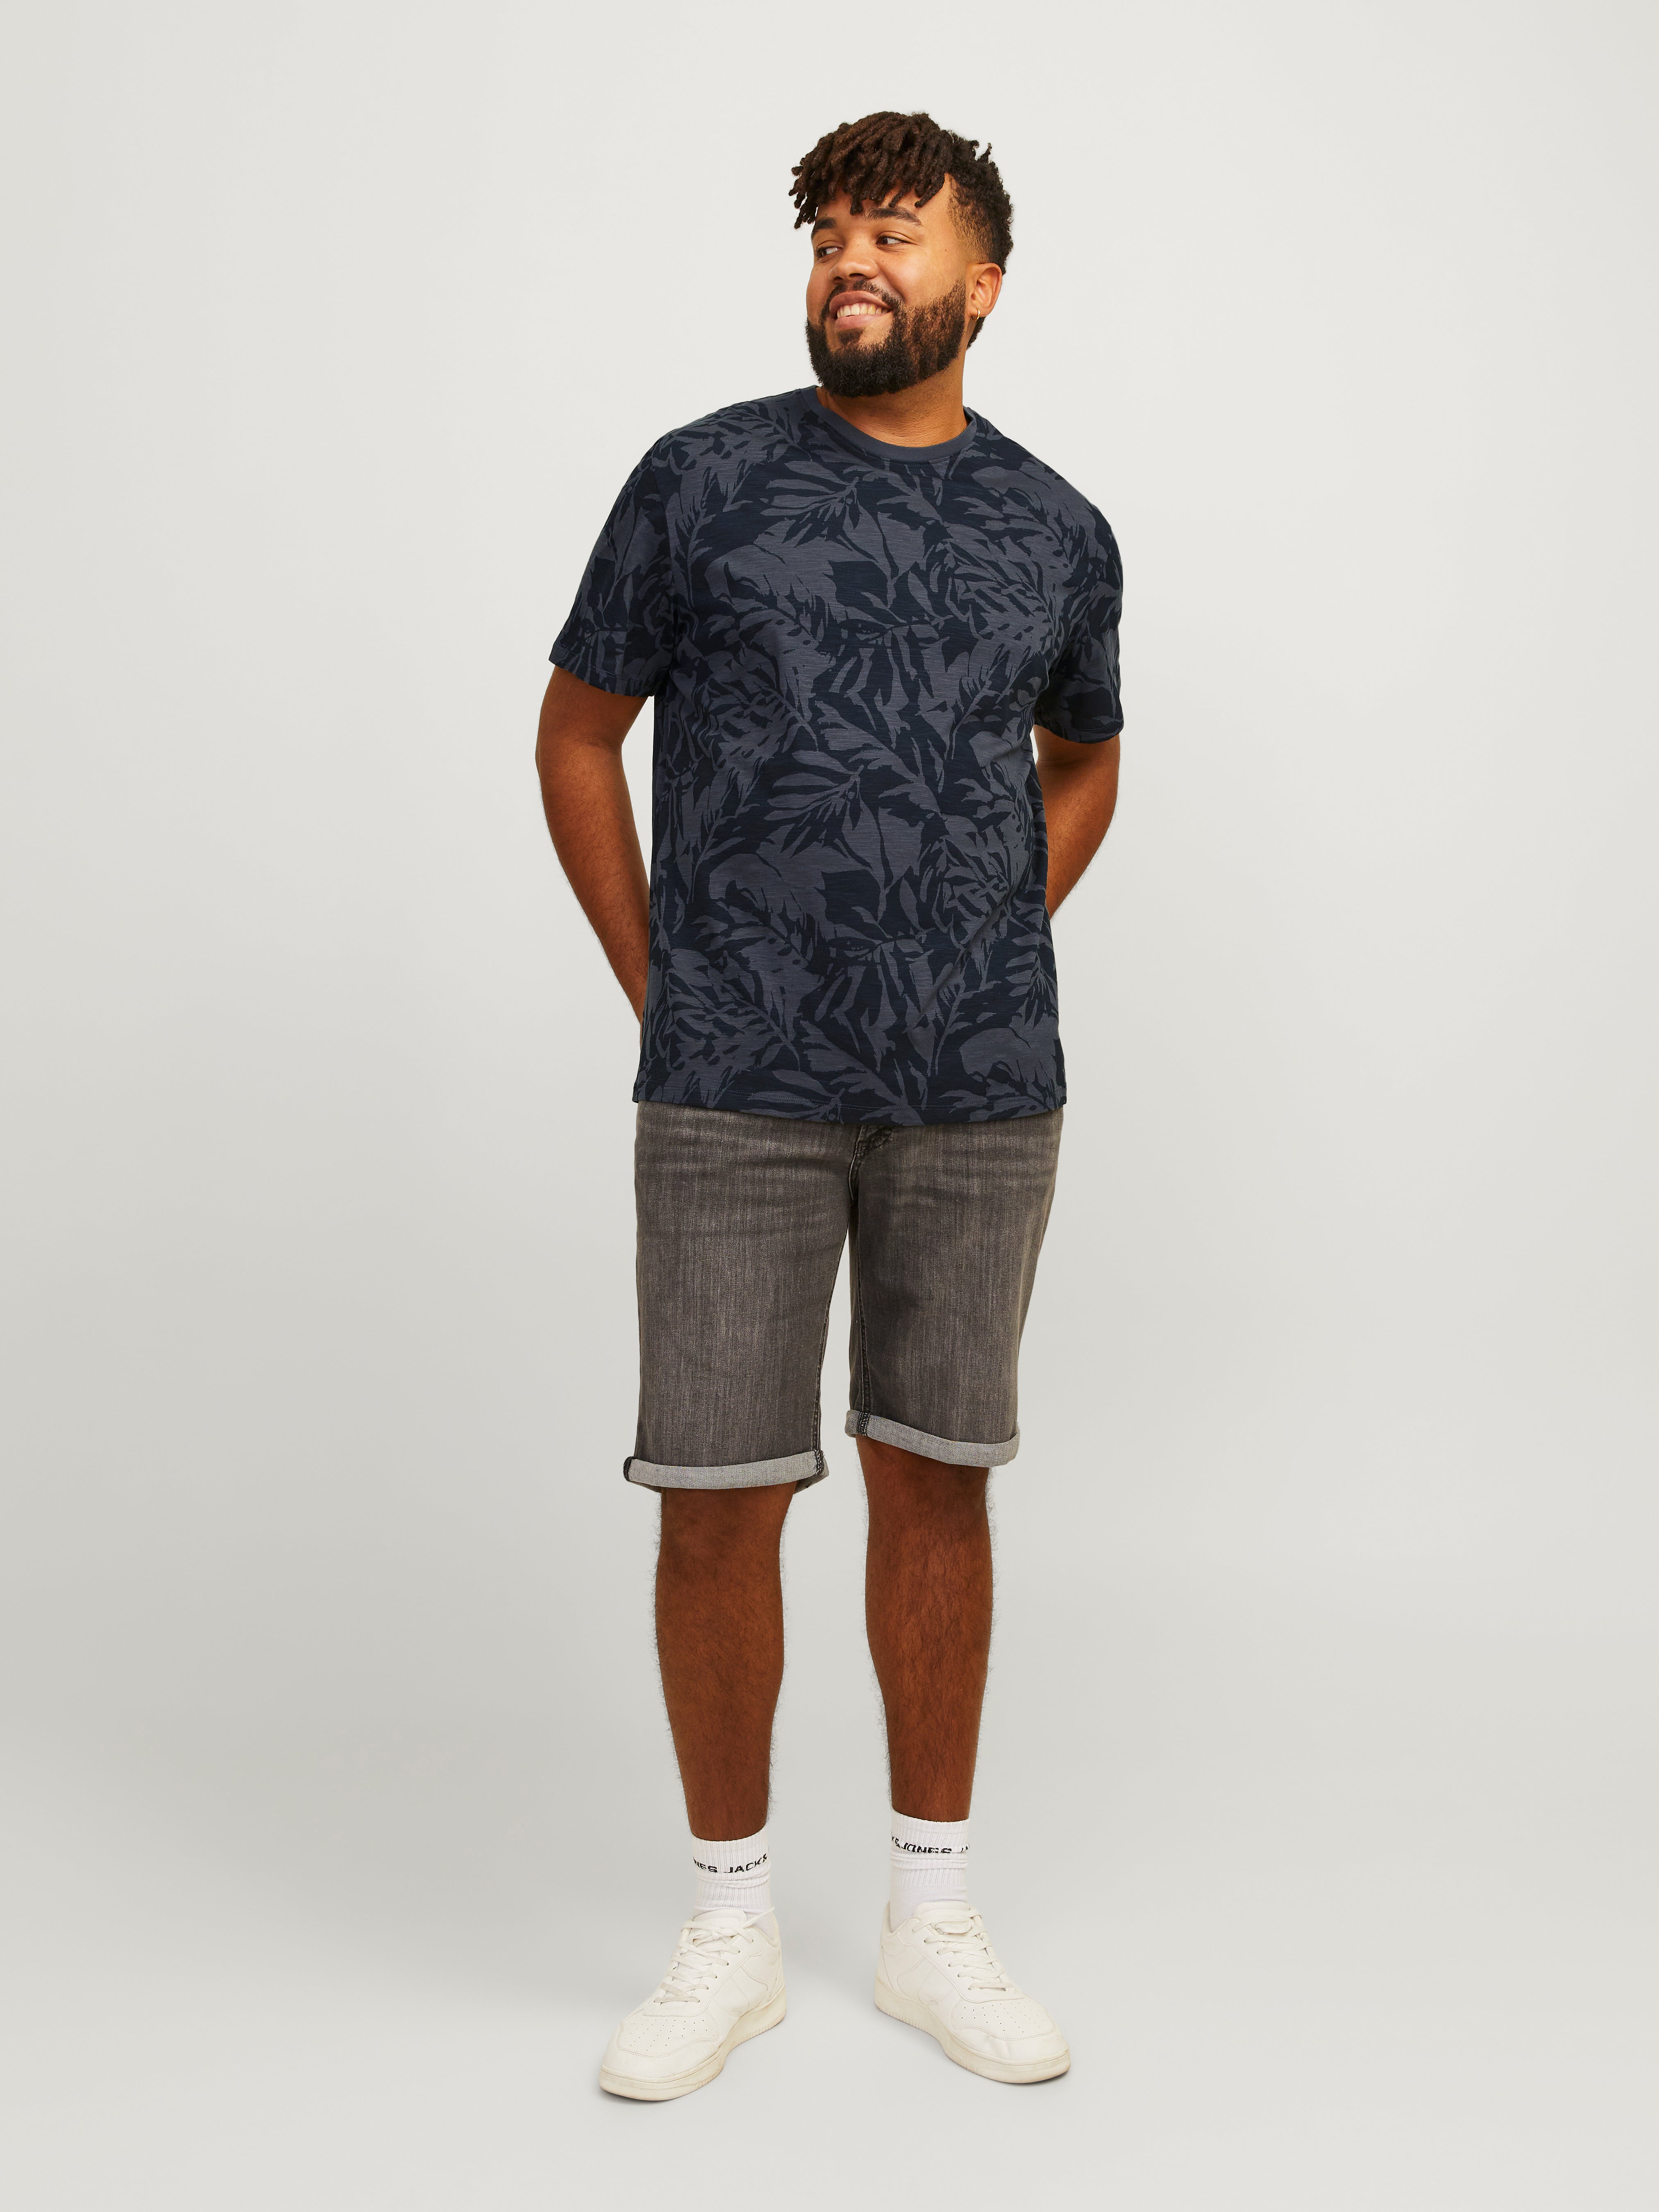 Plus Size All-Over Print T-shirt